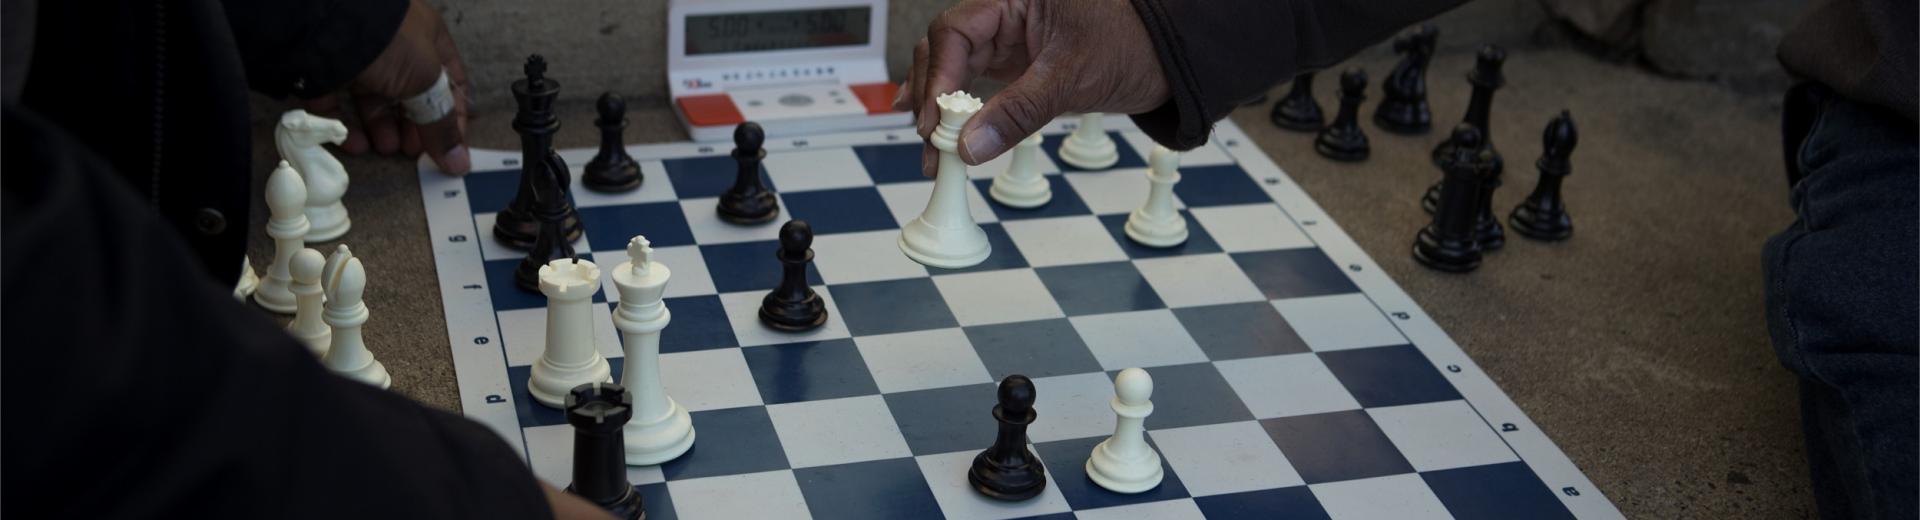 closeup of people playing chess